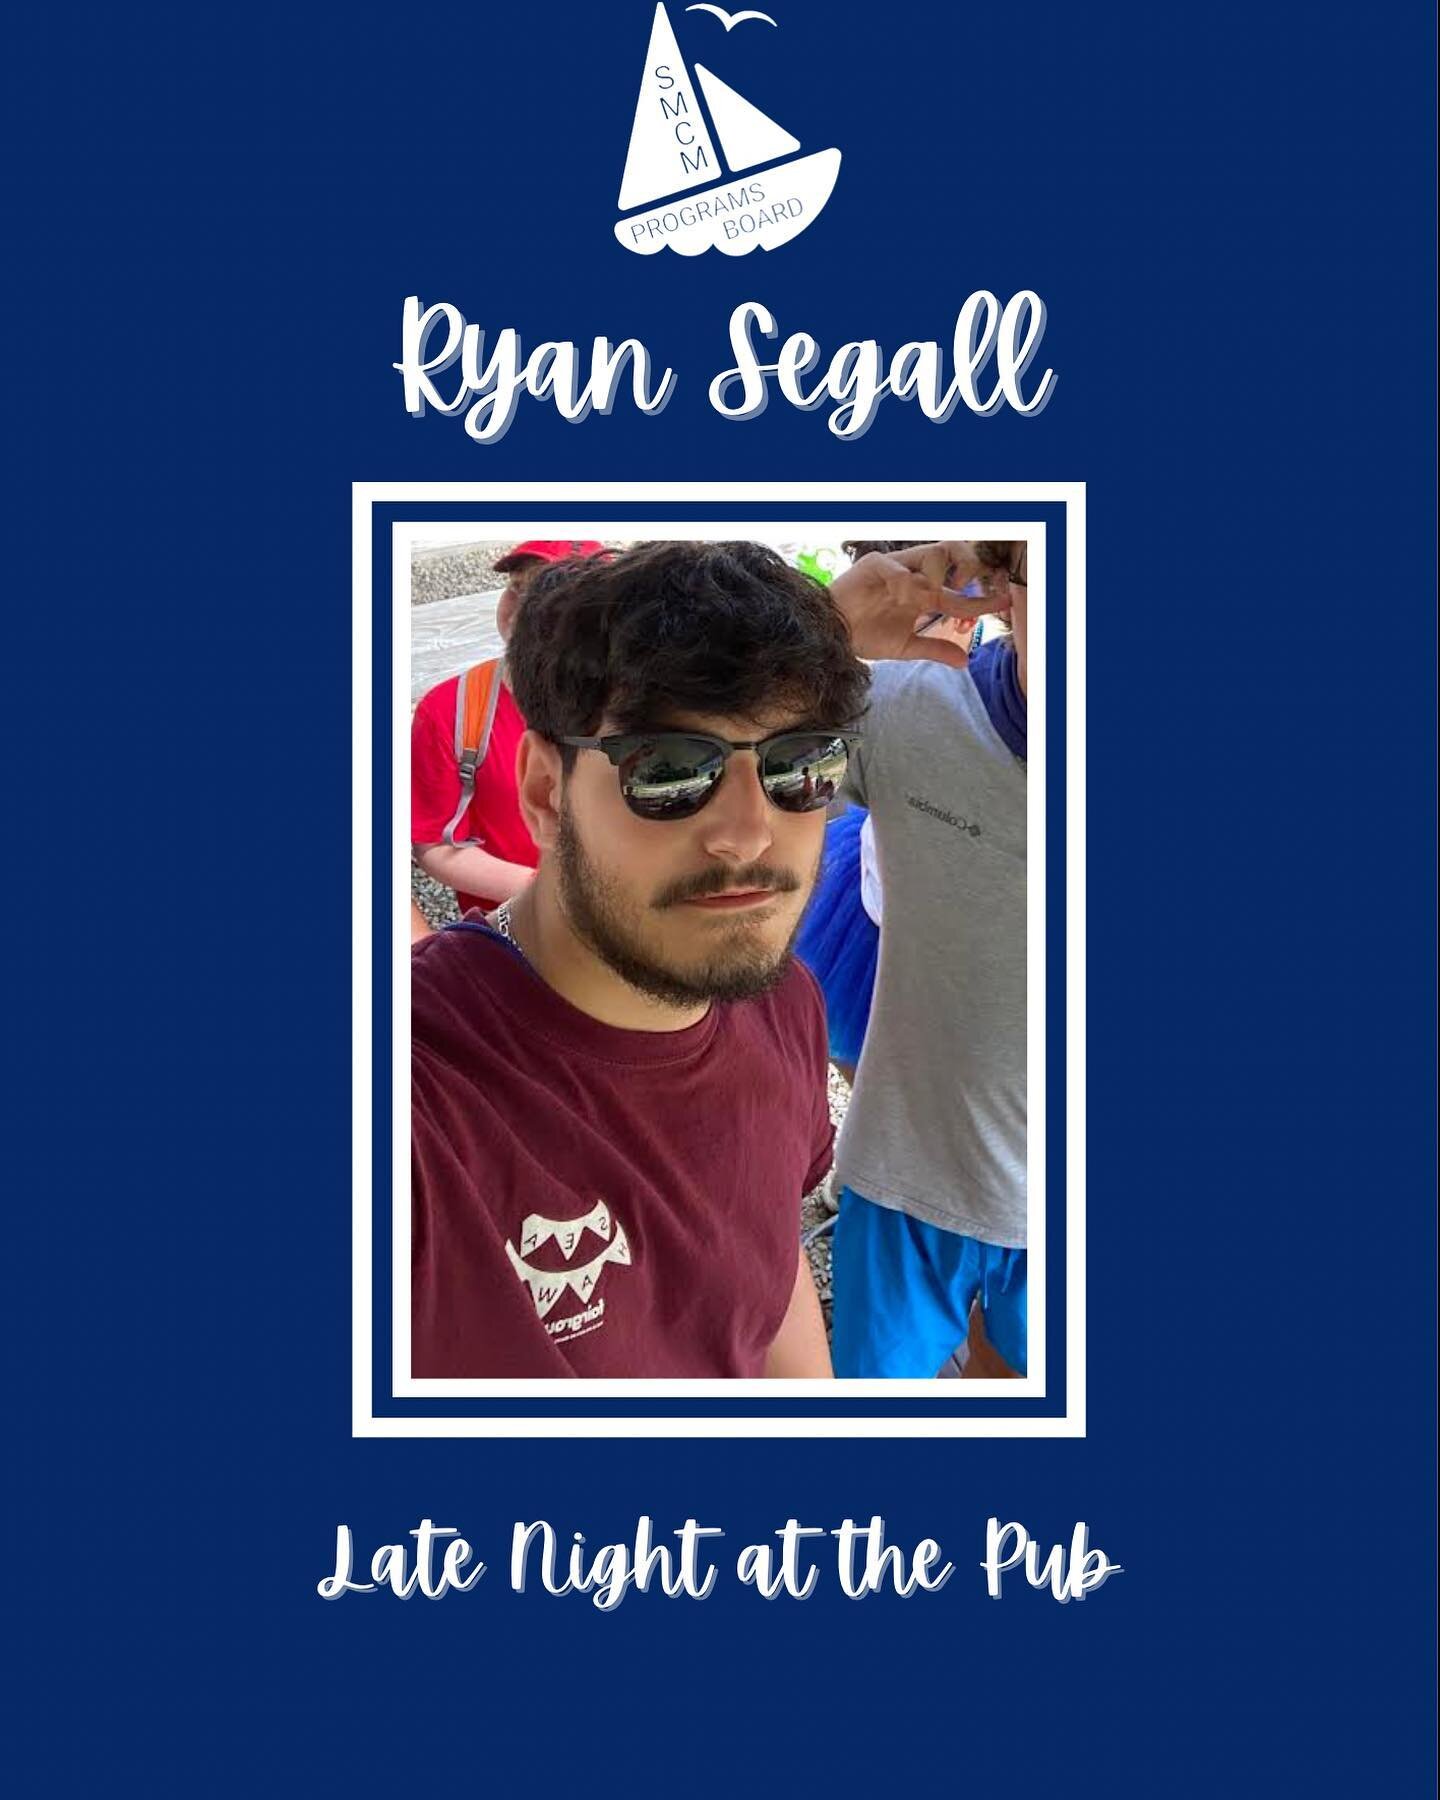 Hello Seahawks! Today&rsquo;s takeover is by Ryan Segall, our marvelous Late Night at the Pub Chair!!!